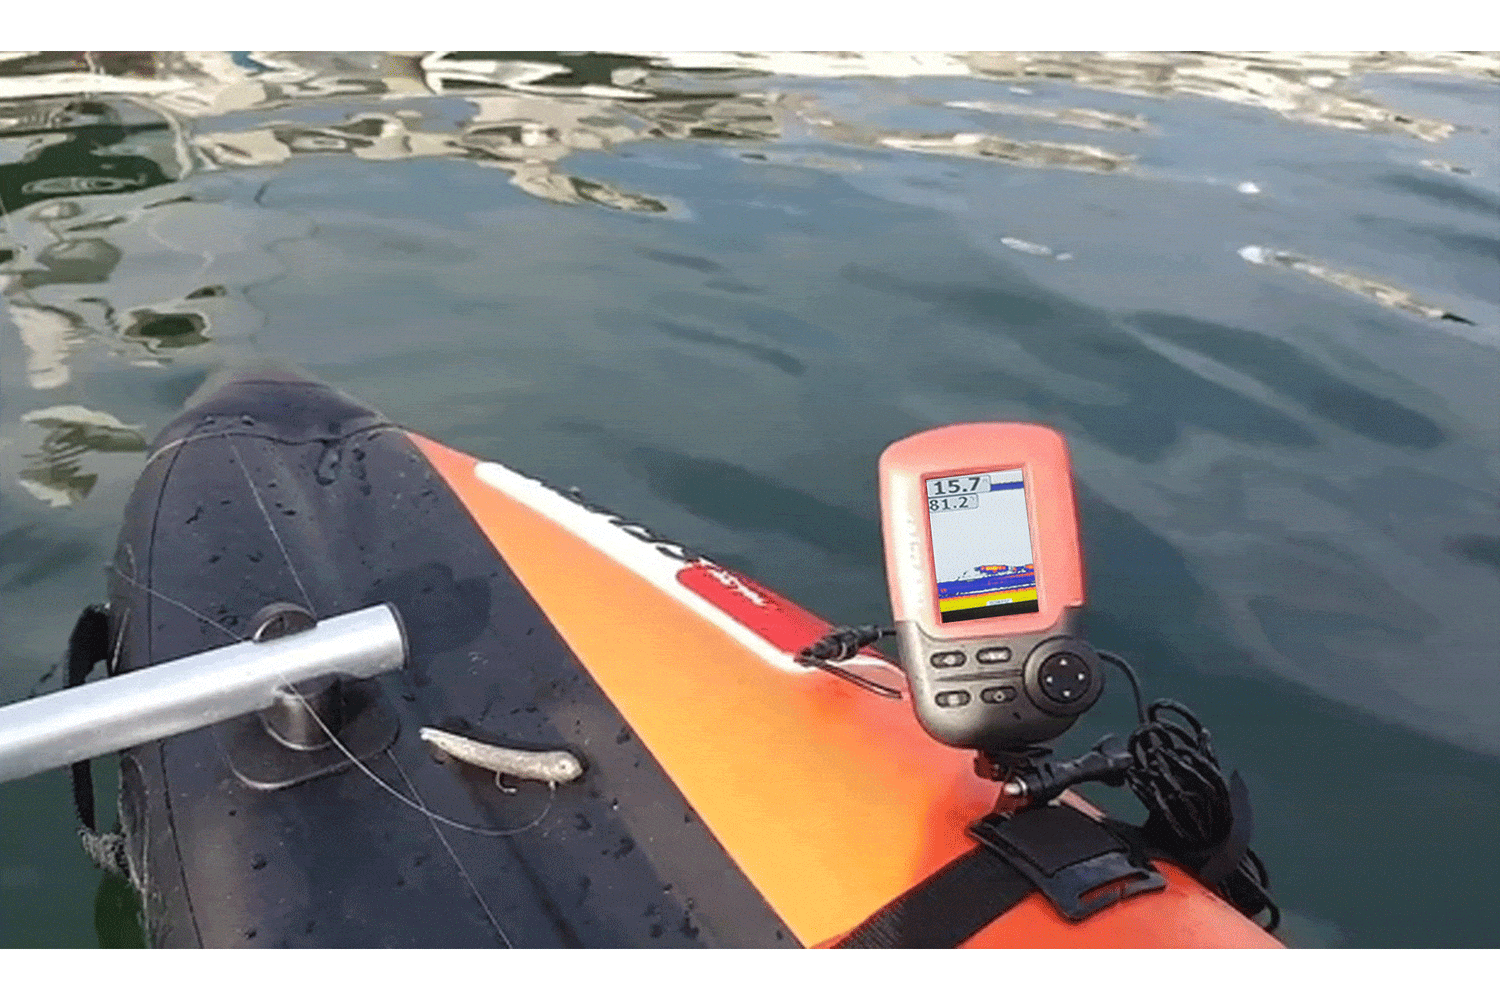 Try A Wholesale fish finder mount To Locate Fish in Water 